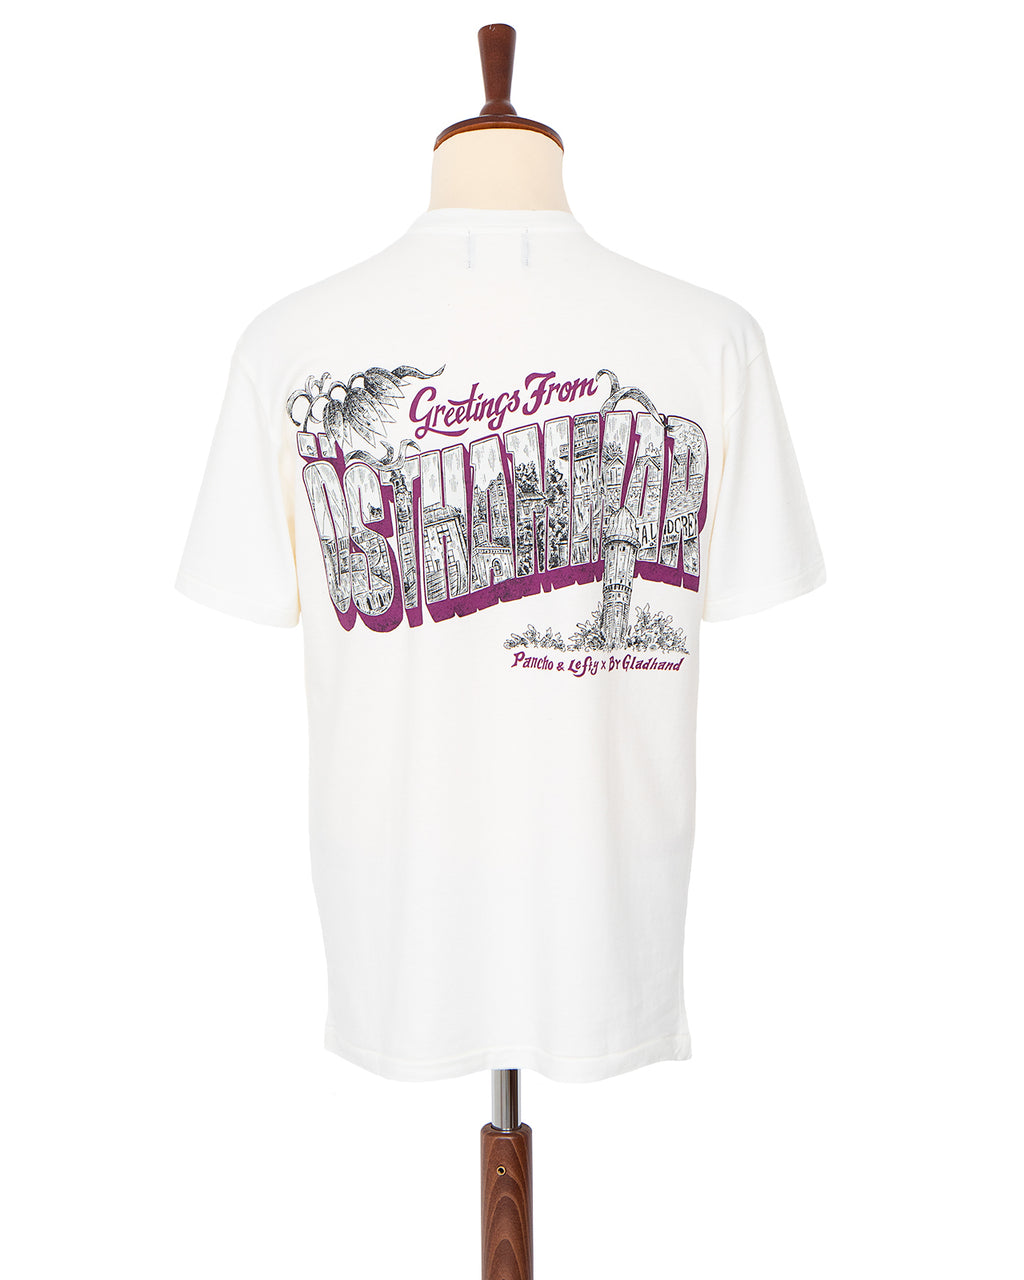 By Glad Hand x Pancho and Lefty T-Shirt, White